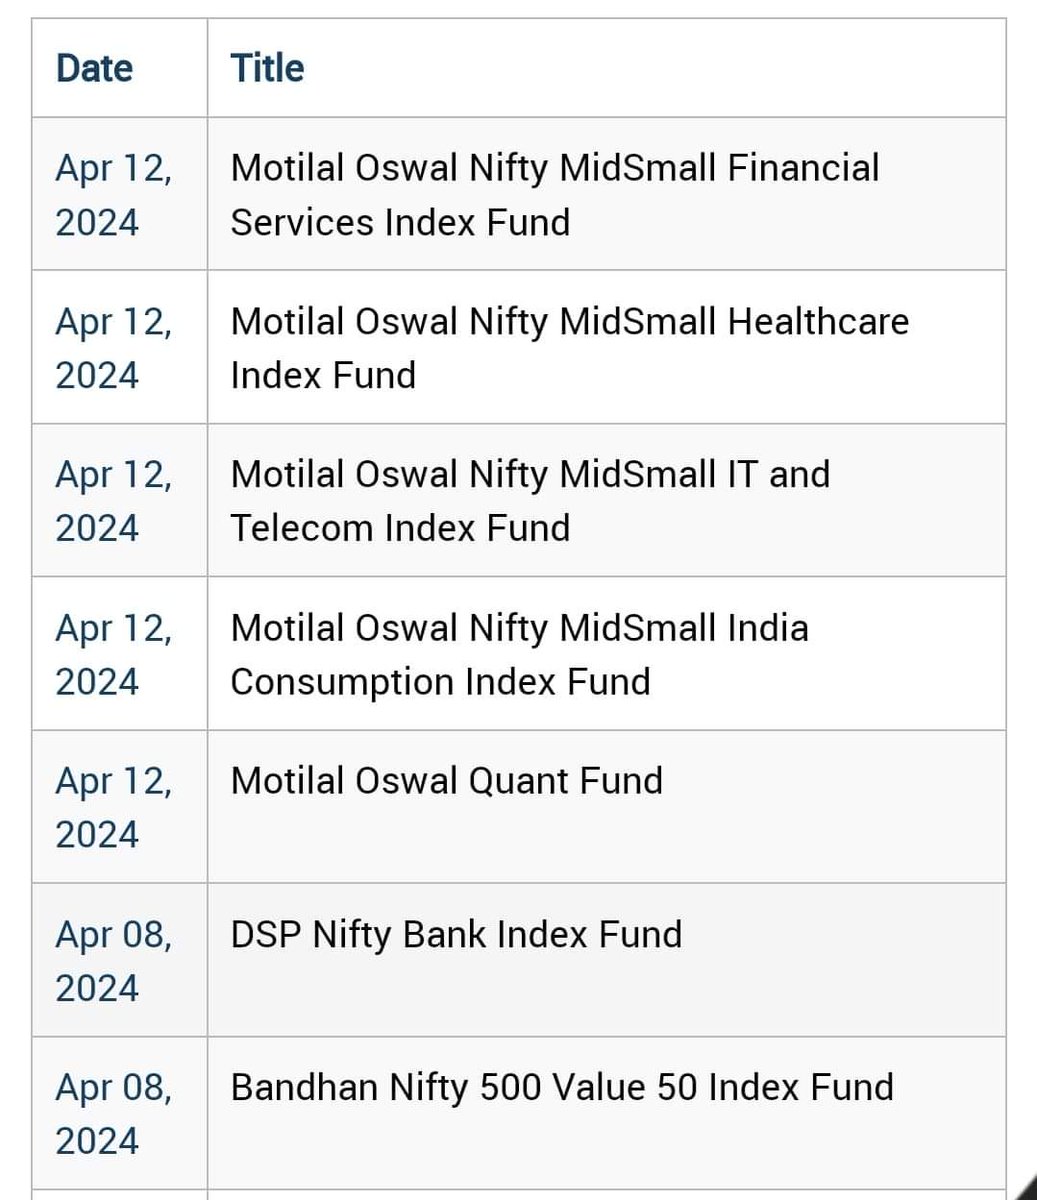 It isn't mid-April yet but the roster of draft offer docs at SEBI's door is long. No surprise that many of these are passive. Indexing is now a serious trend in India. We would soon have plenty of new indices and index funds/ETFs based on them.
#mutualfunds #indexfunds #ETFs